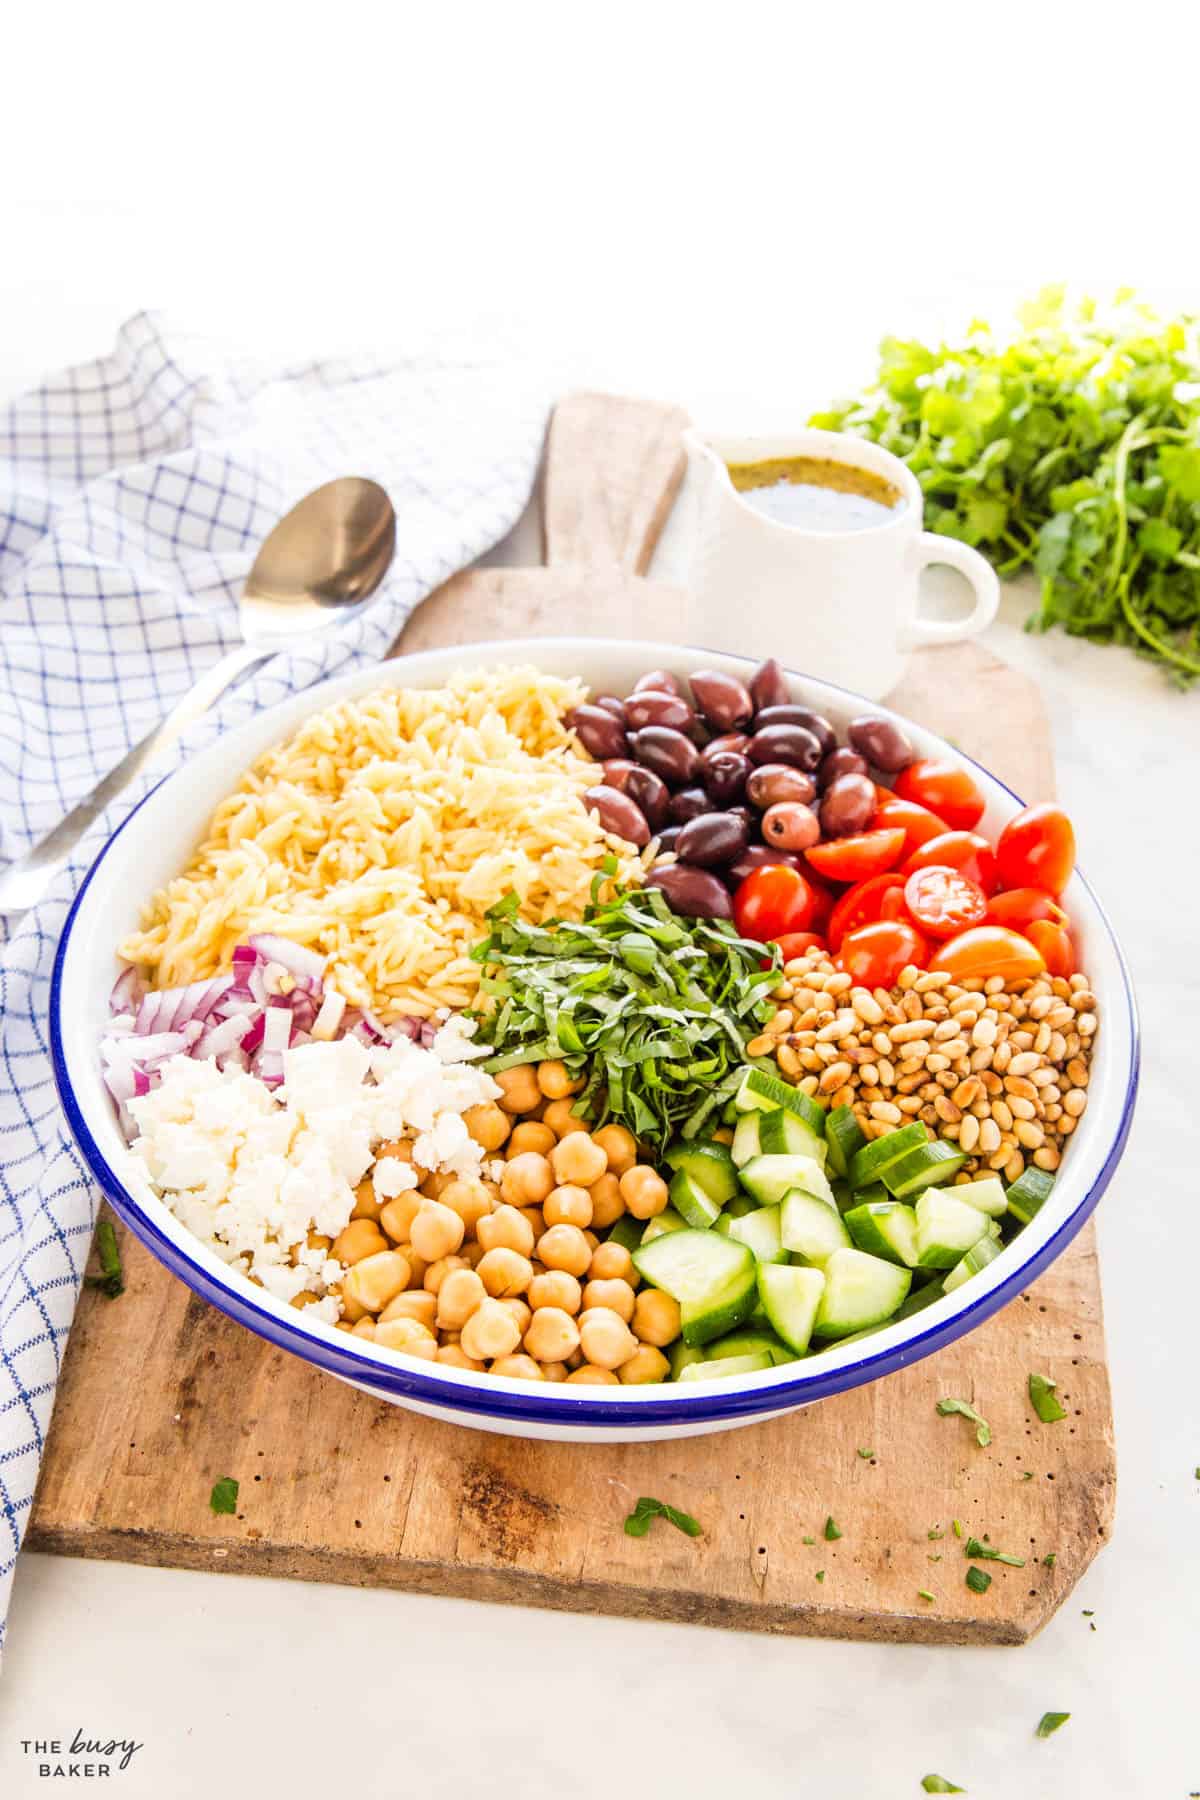 Greek salad with chickpeas, orzo and pine nuts